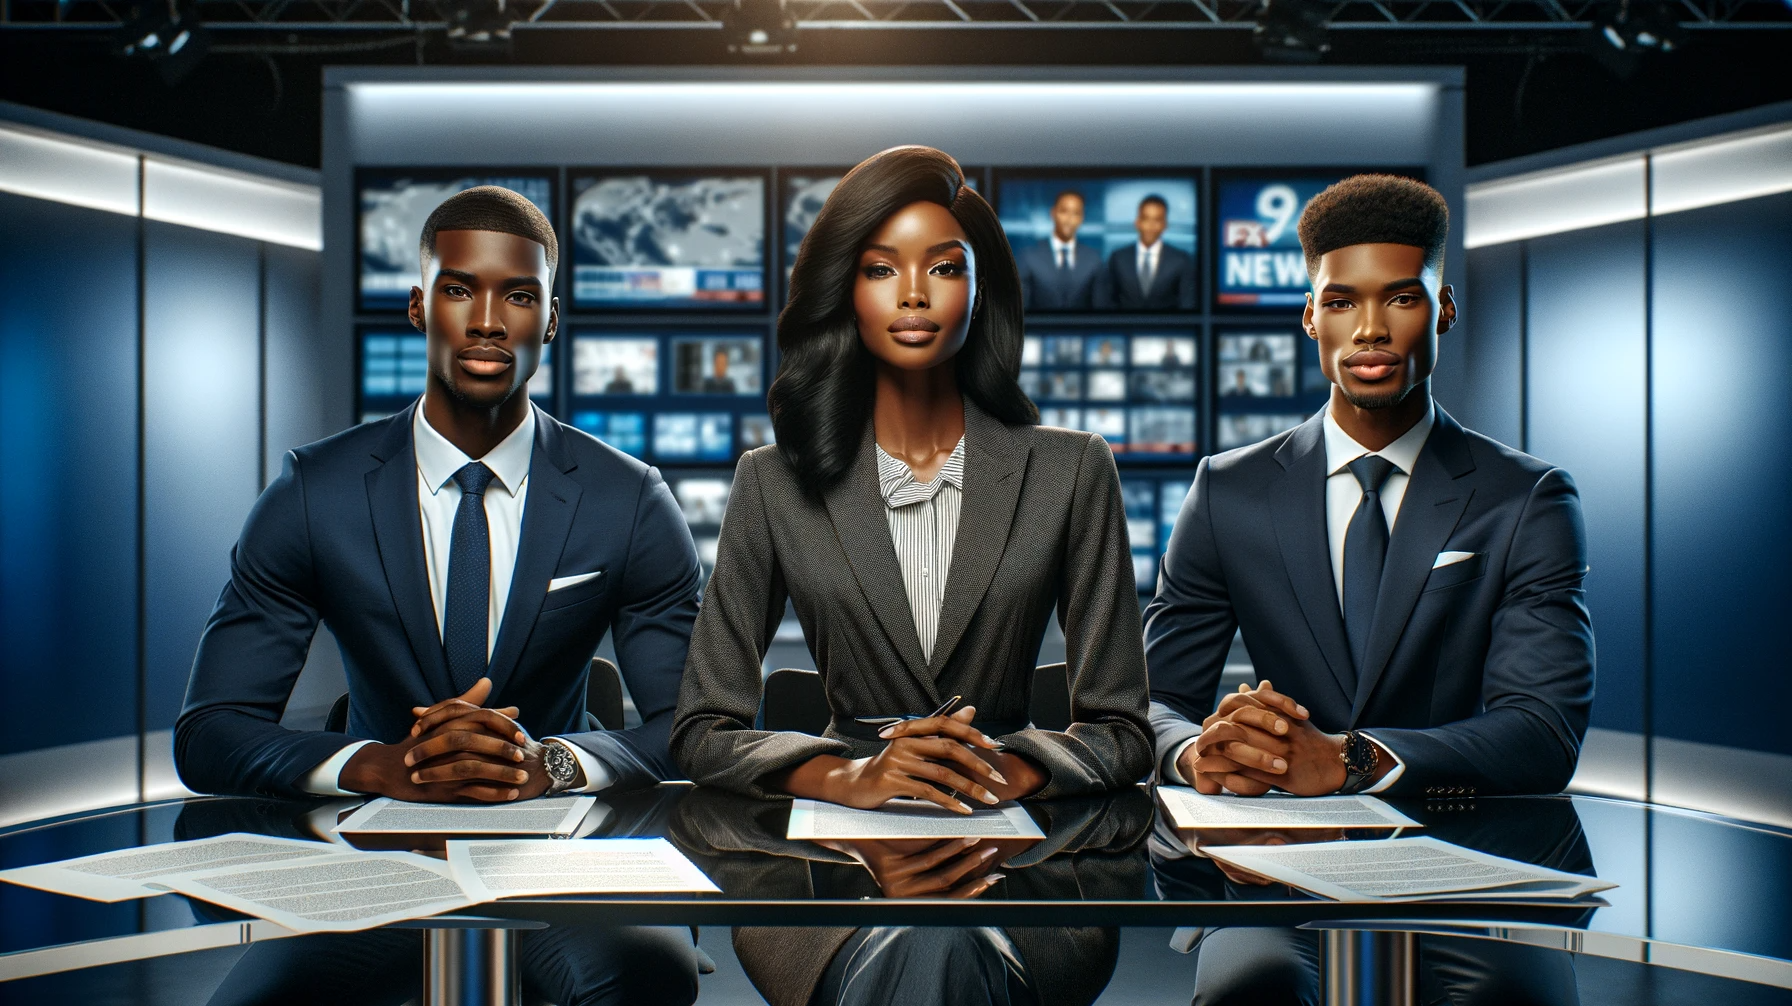 The Black News Anchors Shaping TV Journalism